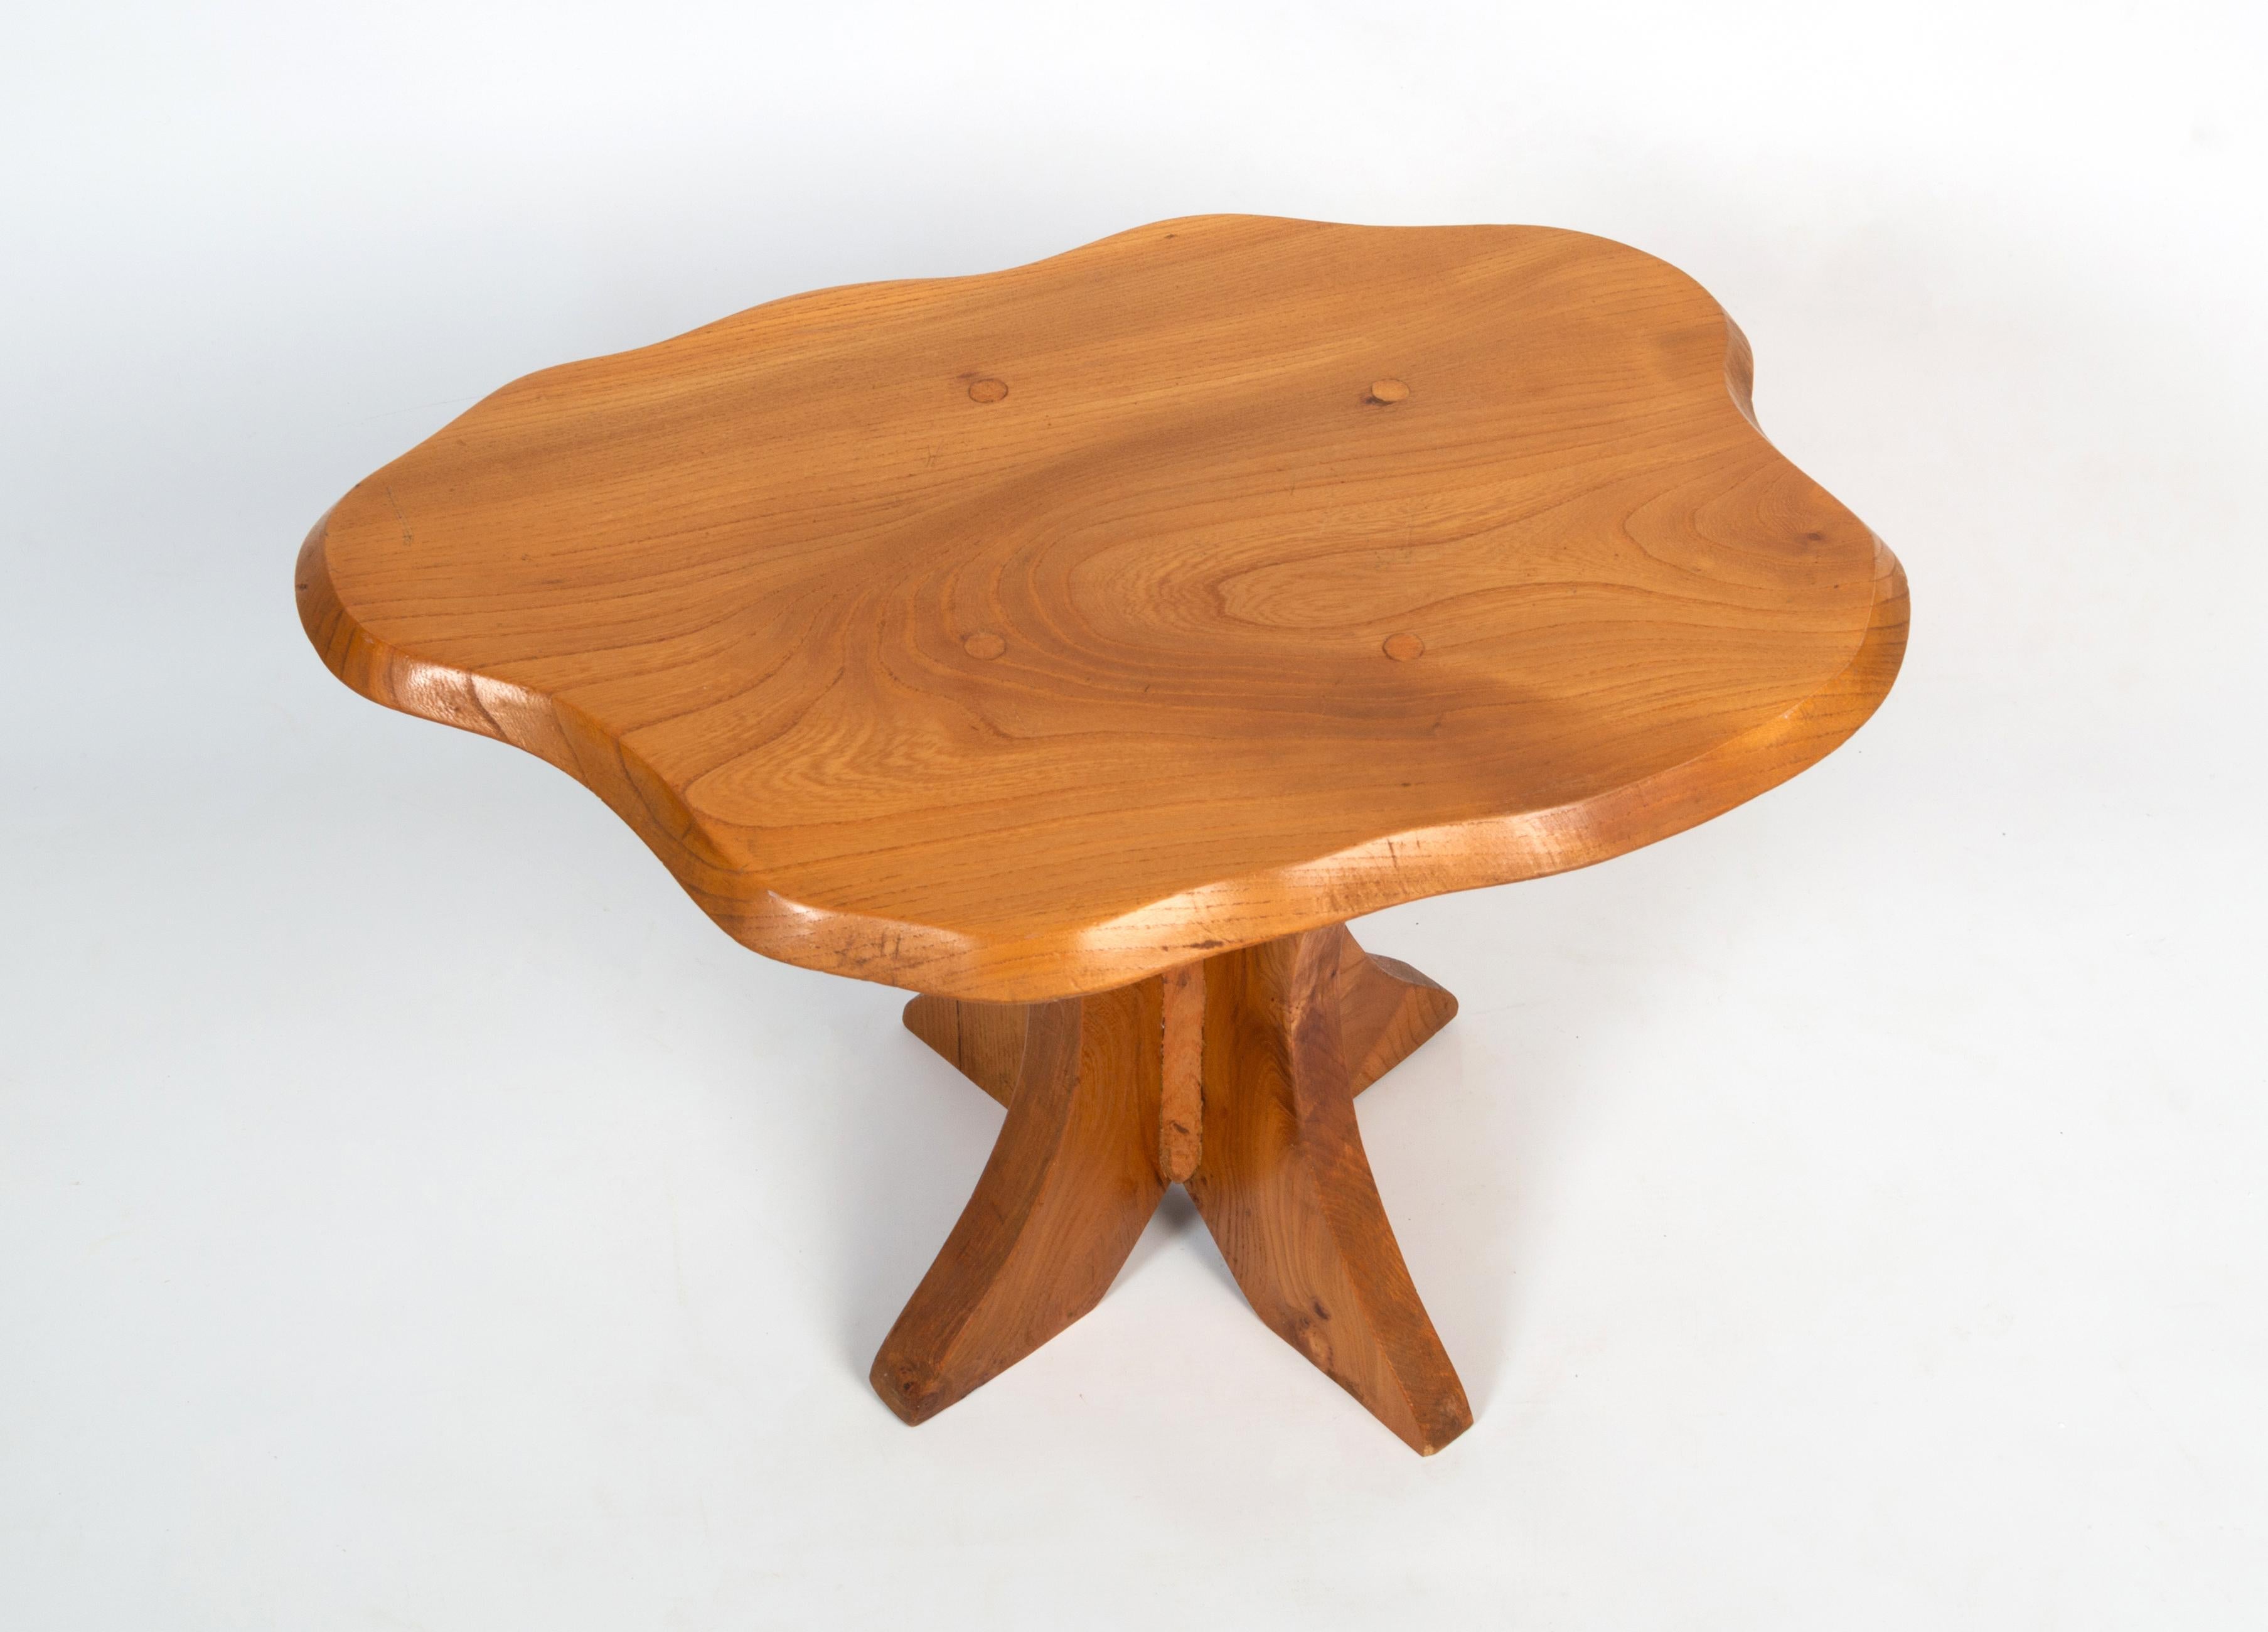 English Midcentury Brutalist Yew Wood Sculptural Side Table England, circa 1970 For Sale